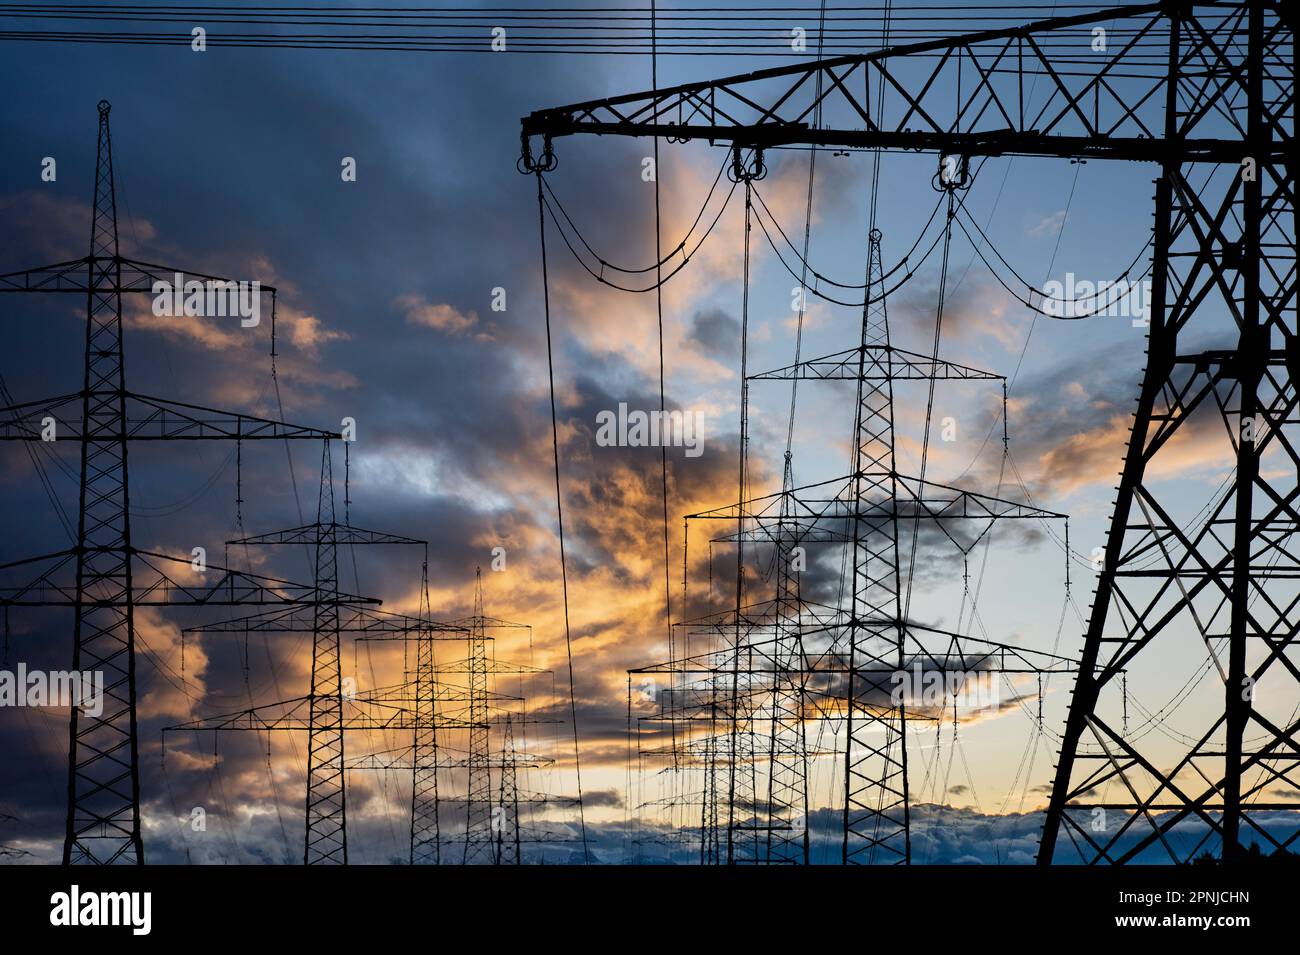 high voltage pylons for electricity and power against sky with dramatic clouds Stock Photo